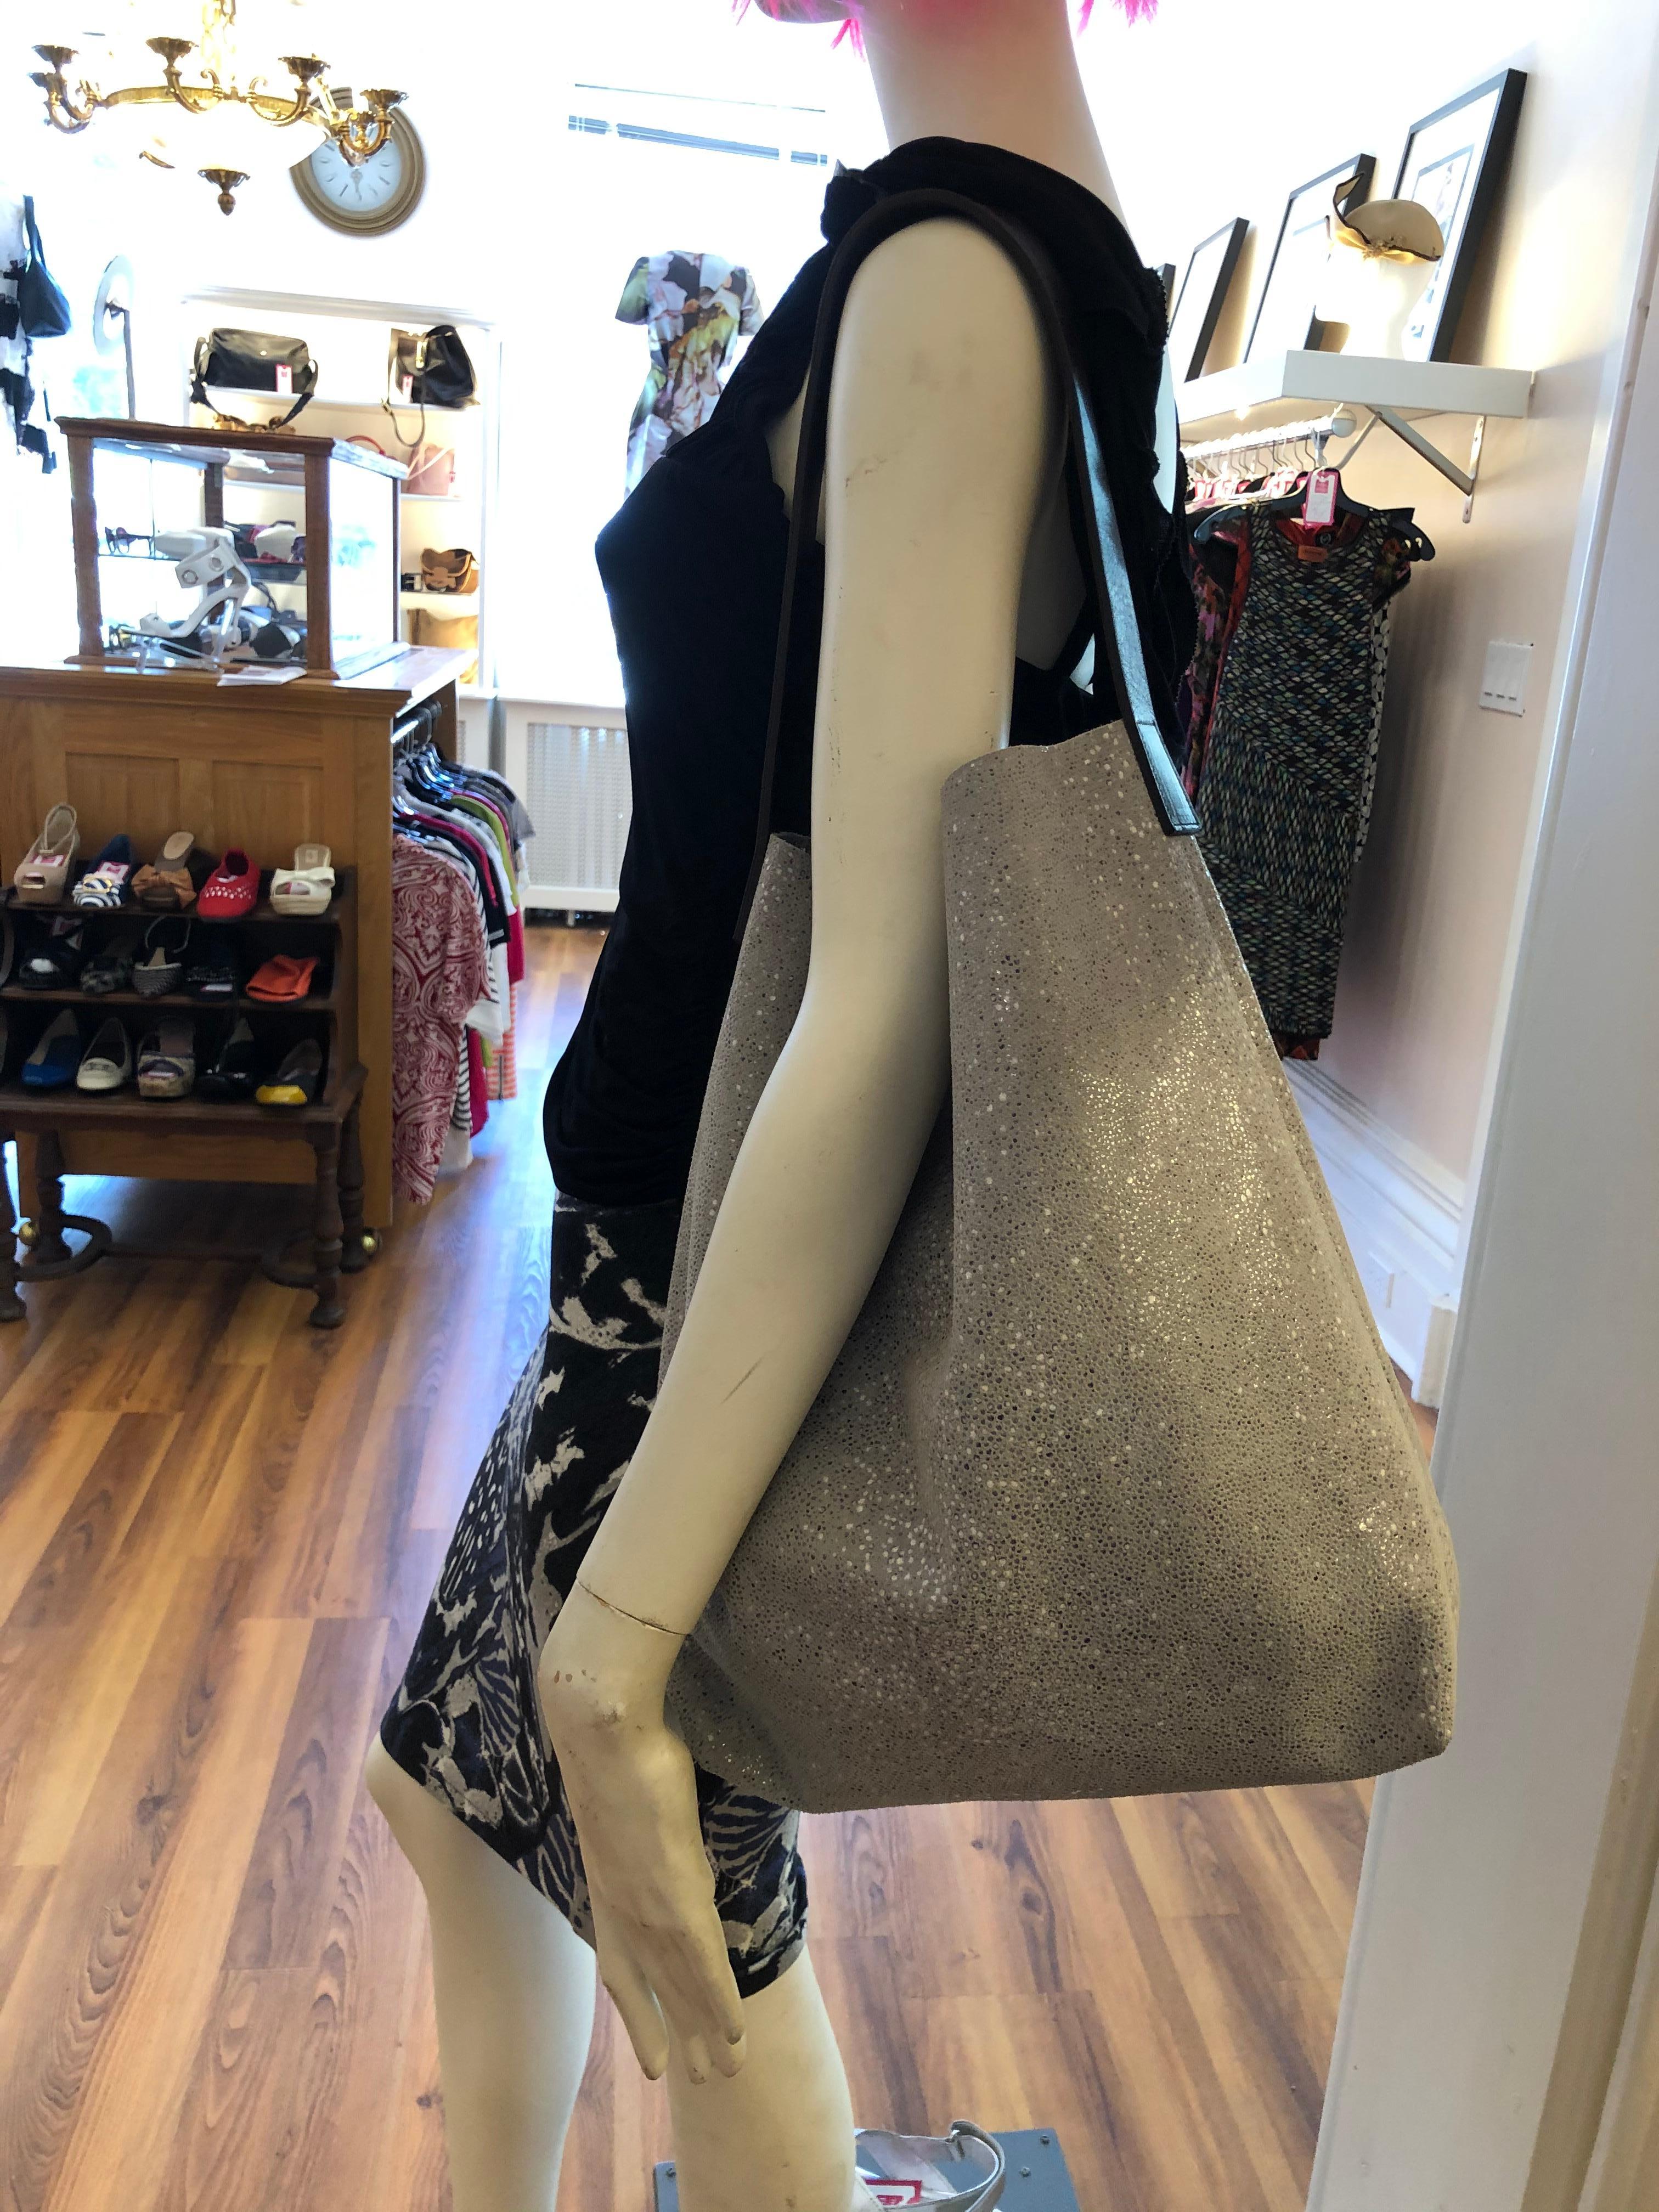 The Linde Gallery St Baths Hobo Bag is made in France of printed velvet leather with a leather shoulder strap (see 2nd picture). There is an inside zip pocket and a light resin finish which make this silver/grey colored bag sparkle.

The bag is